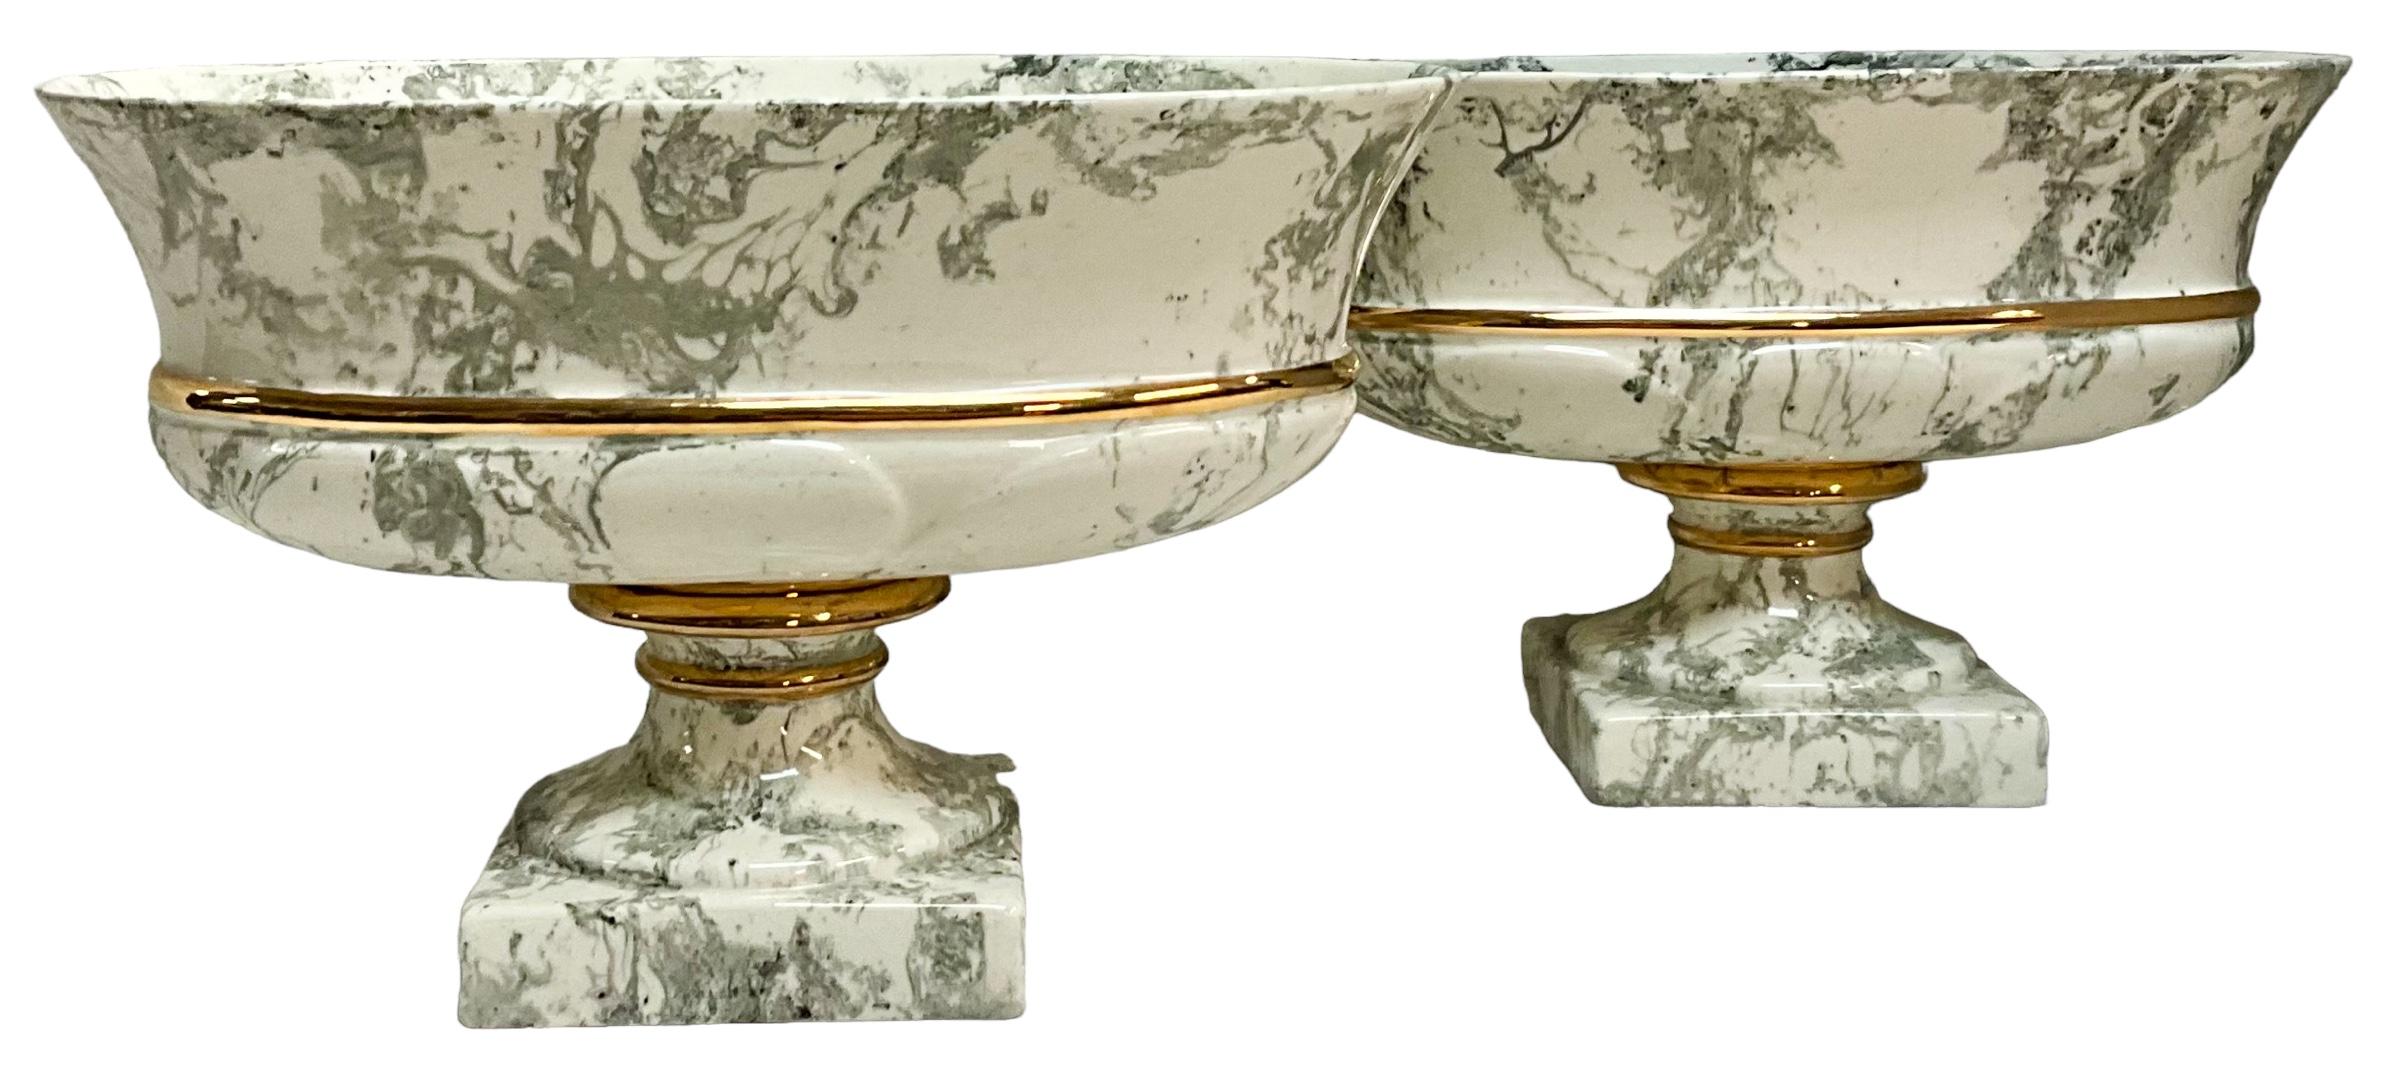 Gold Mid-Century Neo-Classical Style Faux Marbleized Mantel Planters / Cachepot - S/2 For Sale